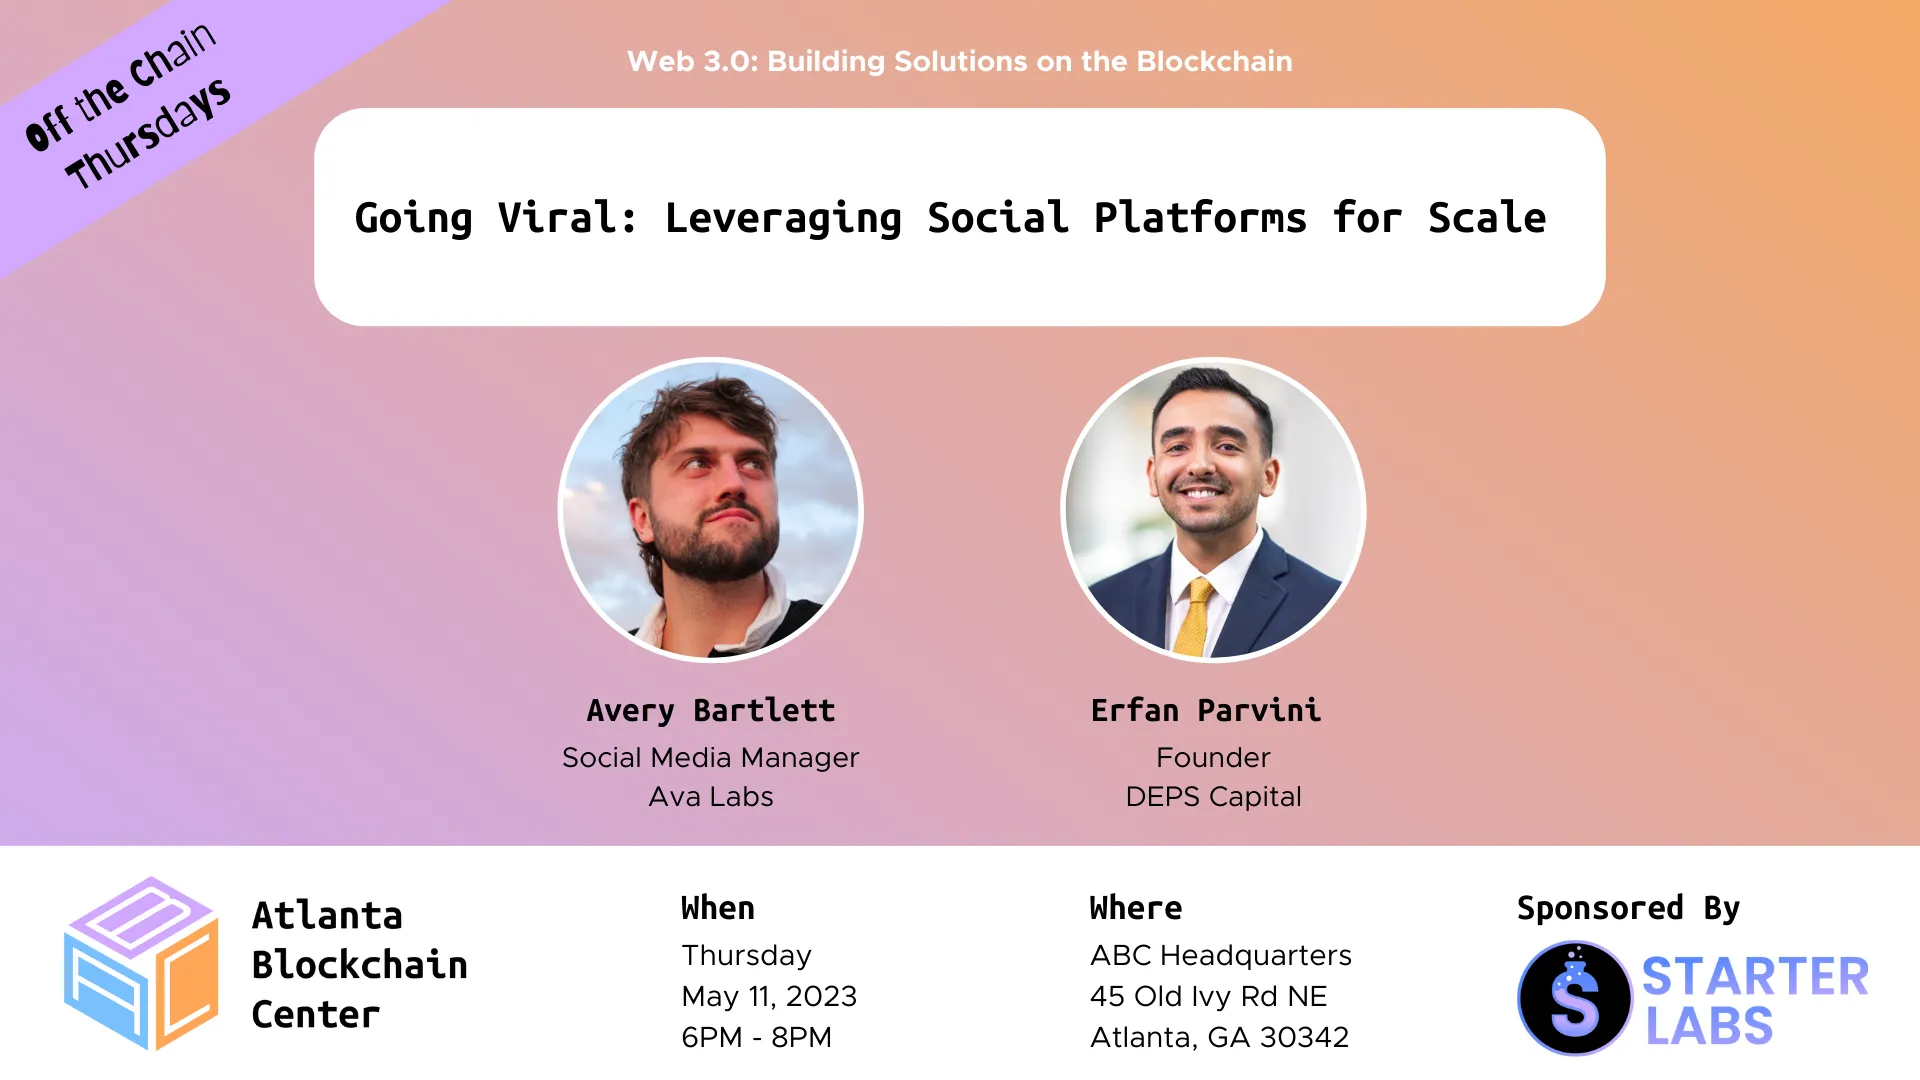 Going Viral: Leveraging Social Platforms for Scale